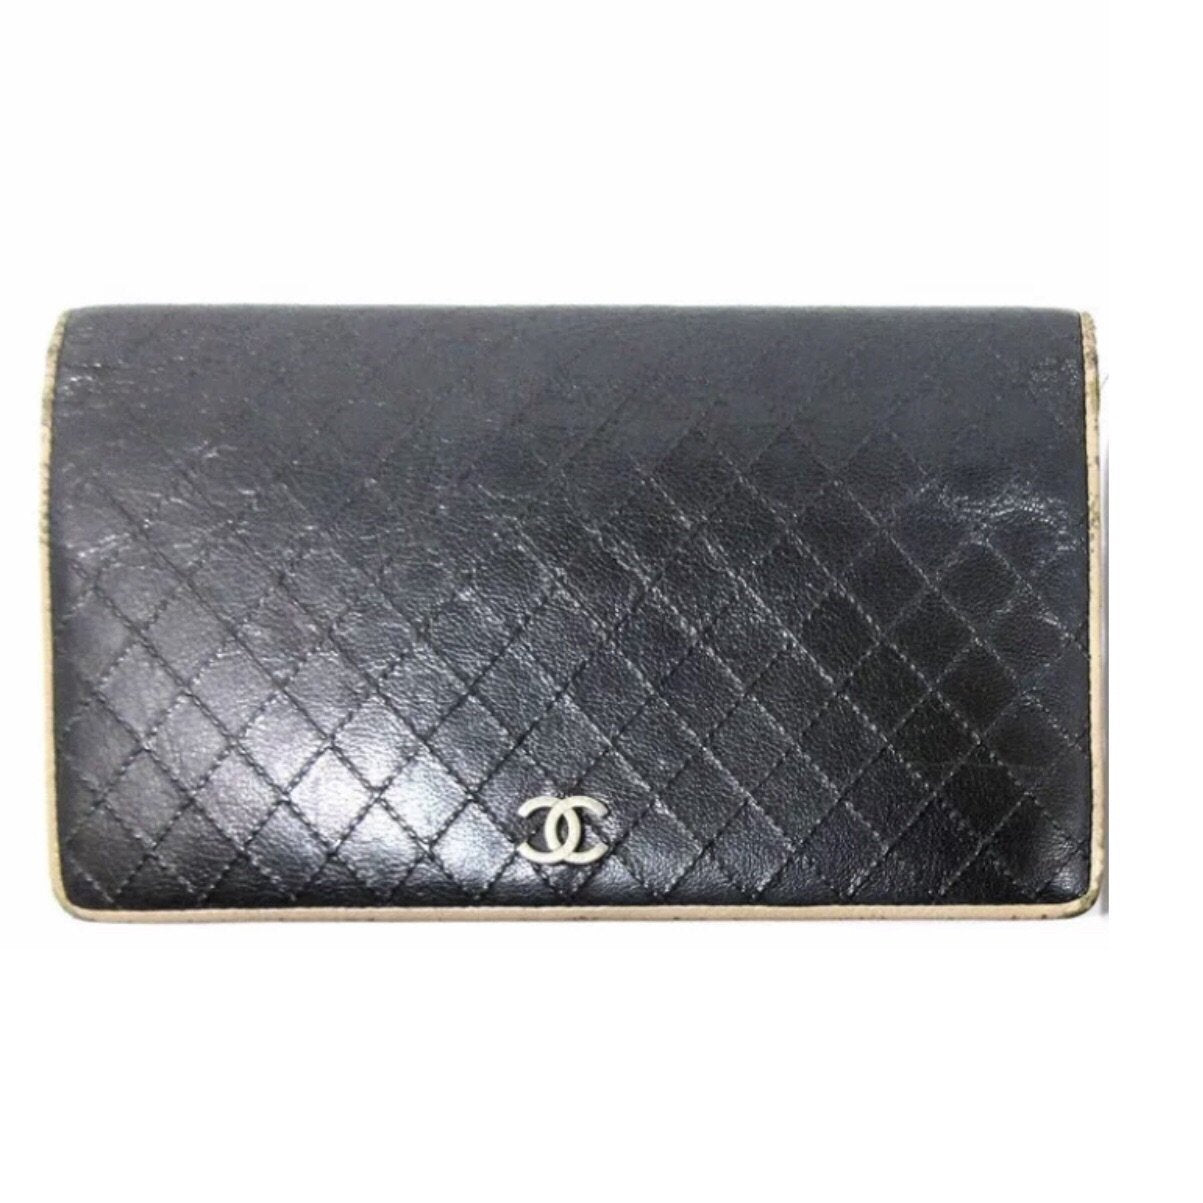 Chanel Classic Long Flap Wallet  Chanel classic, Chanel bag, Chanel